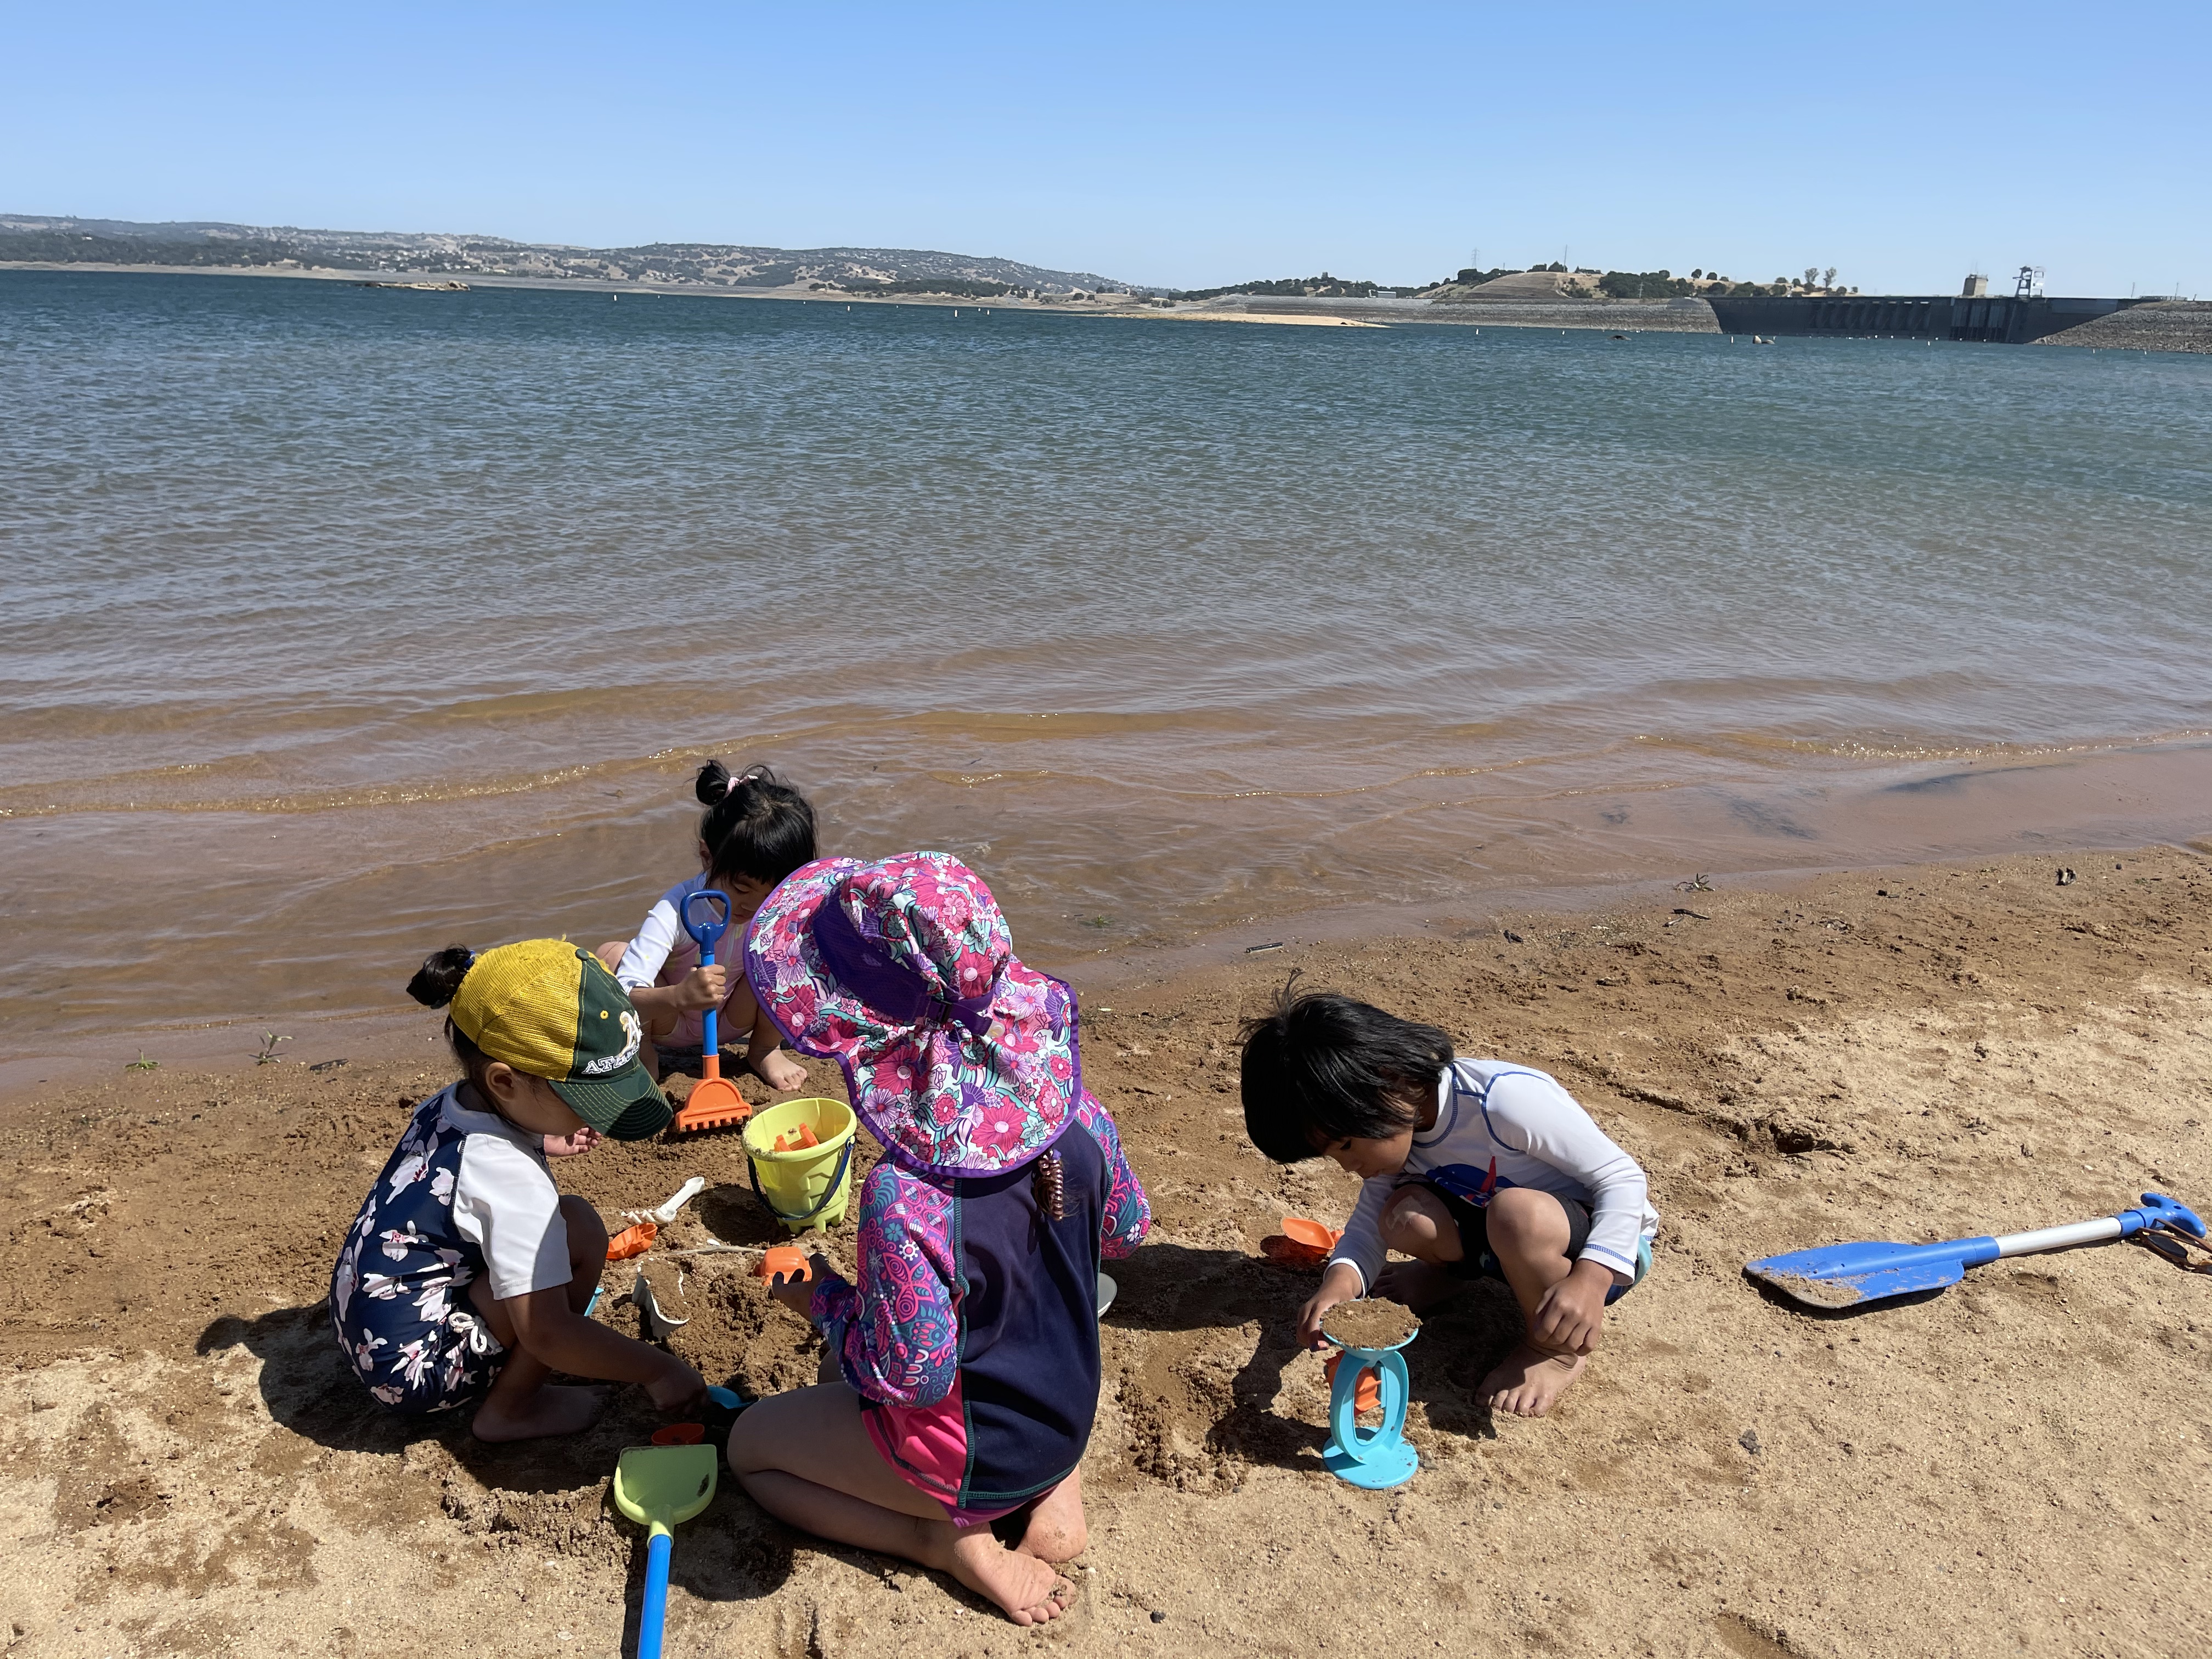 An image of four children playing along the shoreline of Folsom Lake, with the other end of the lake seen in the background.